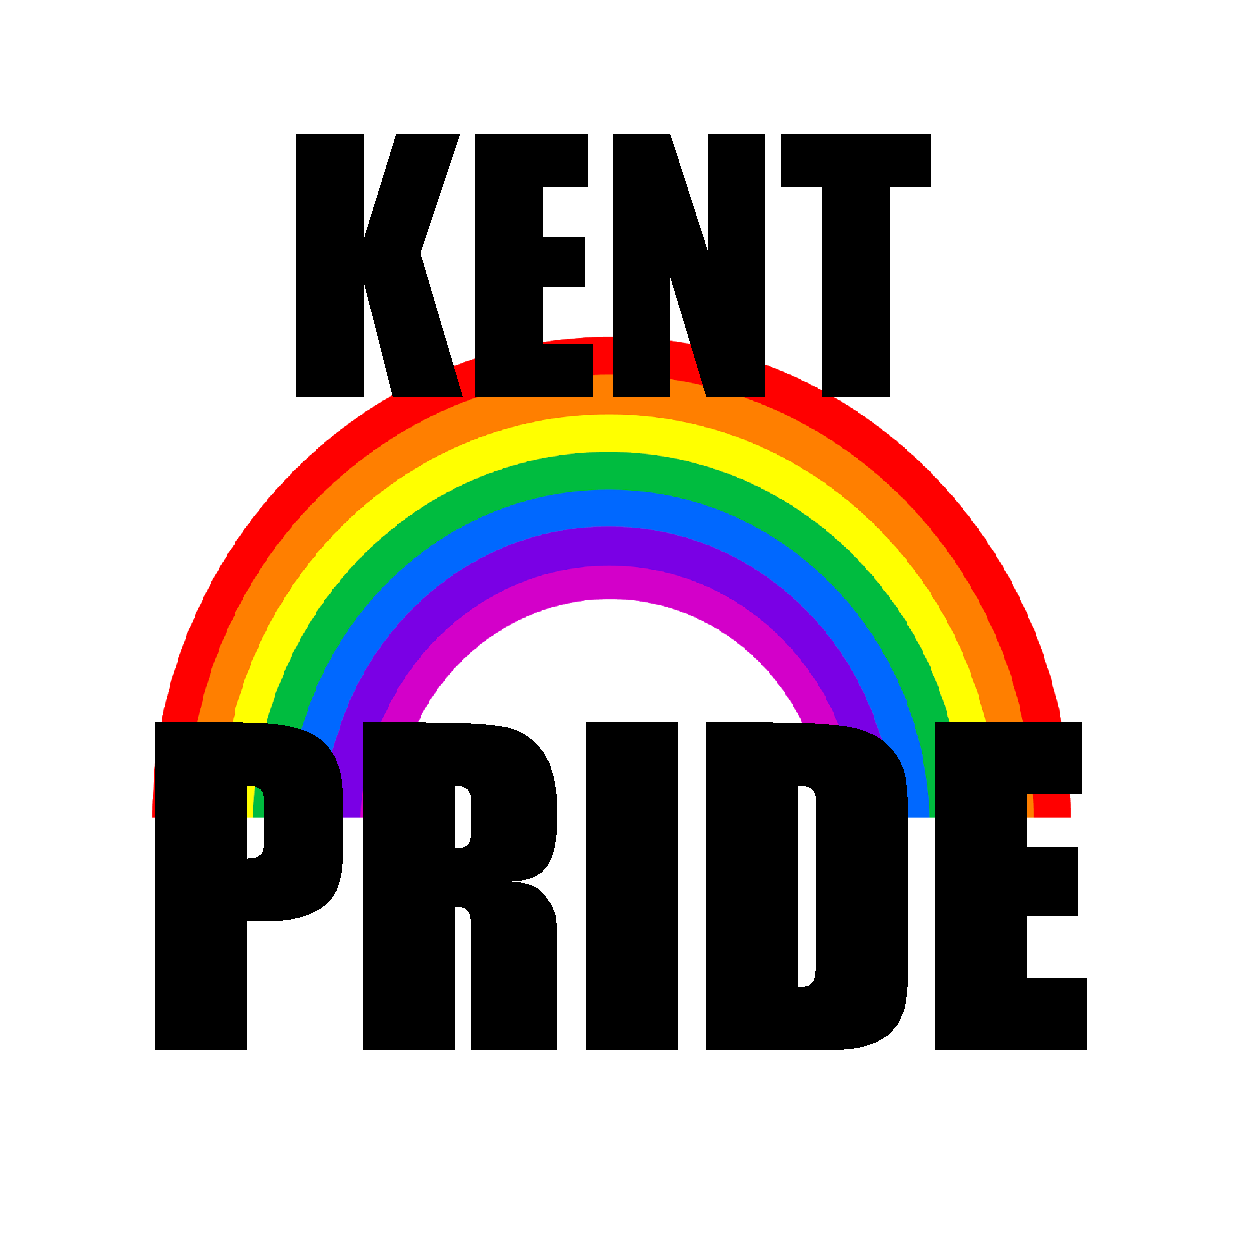 Kent pride events group